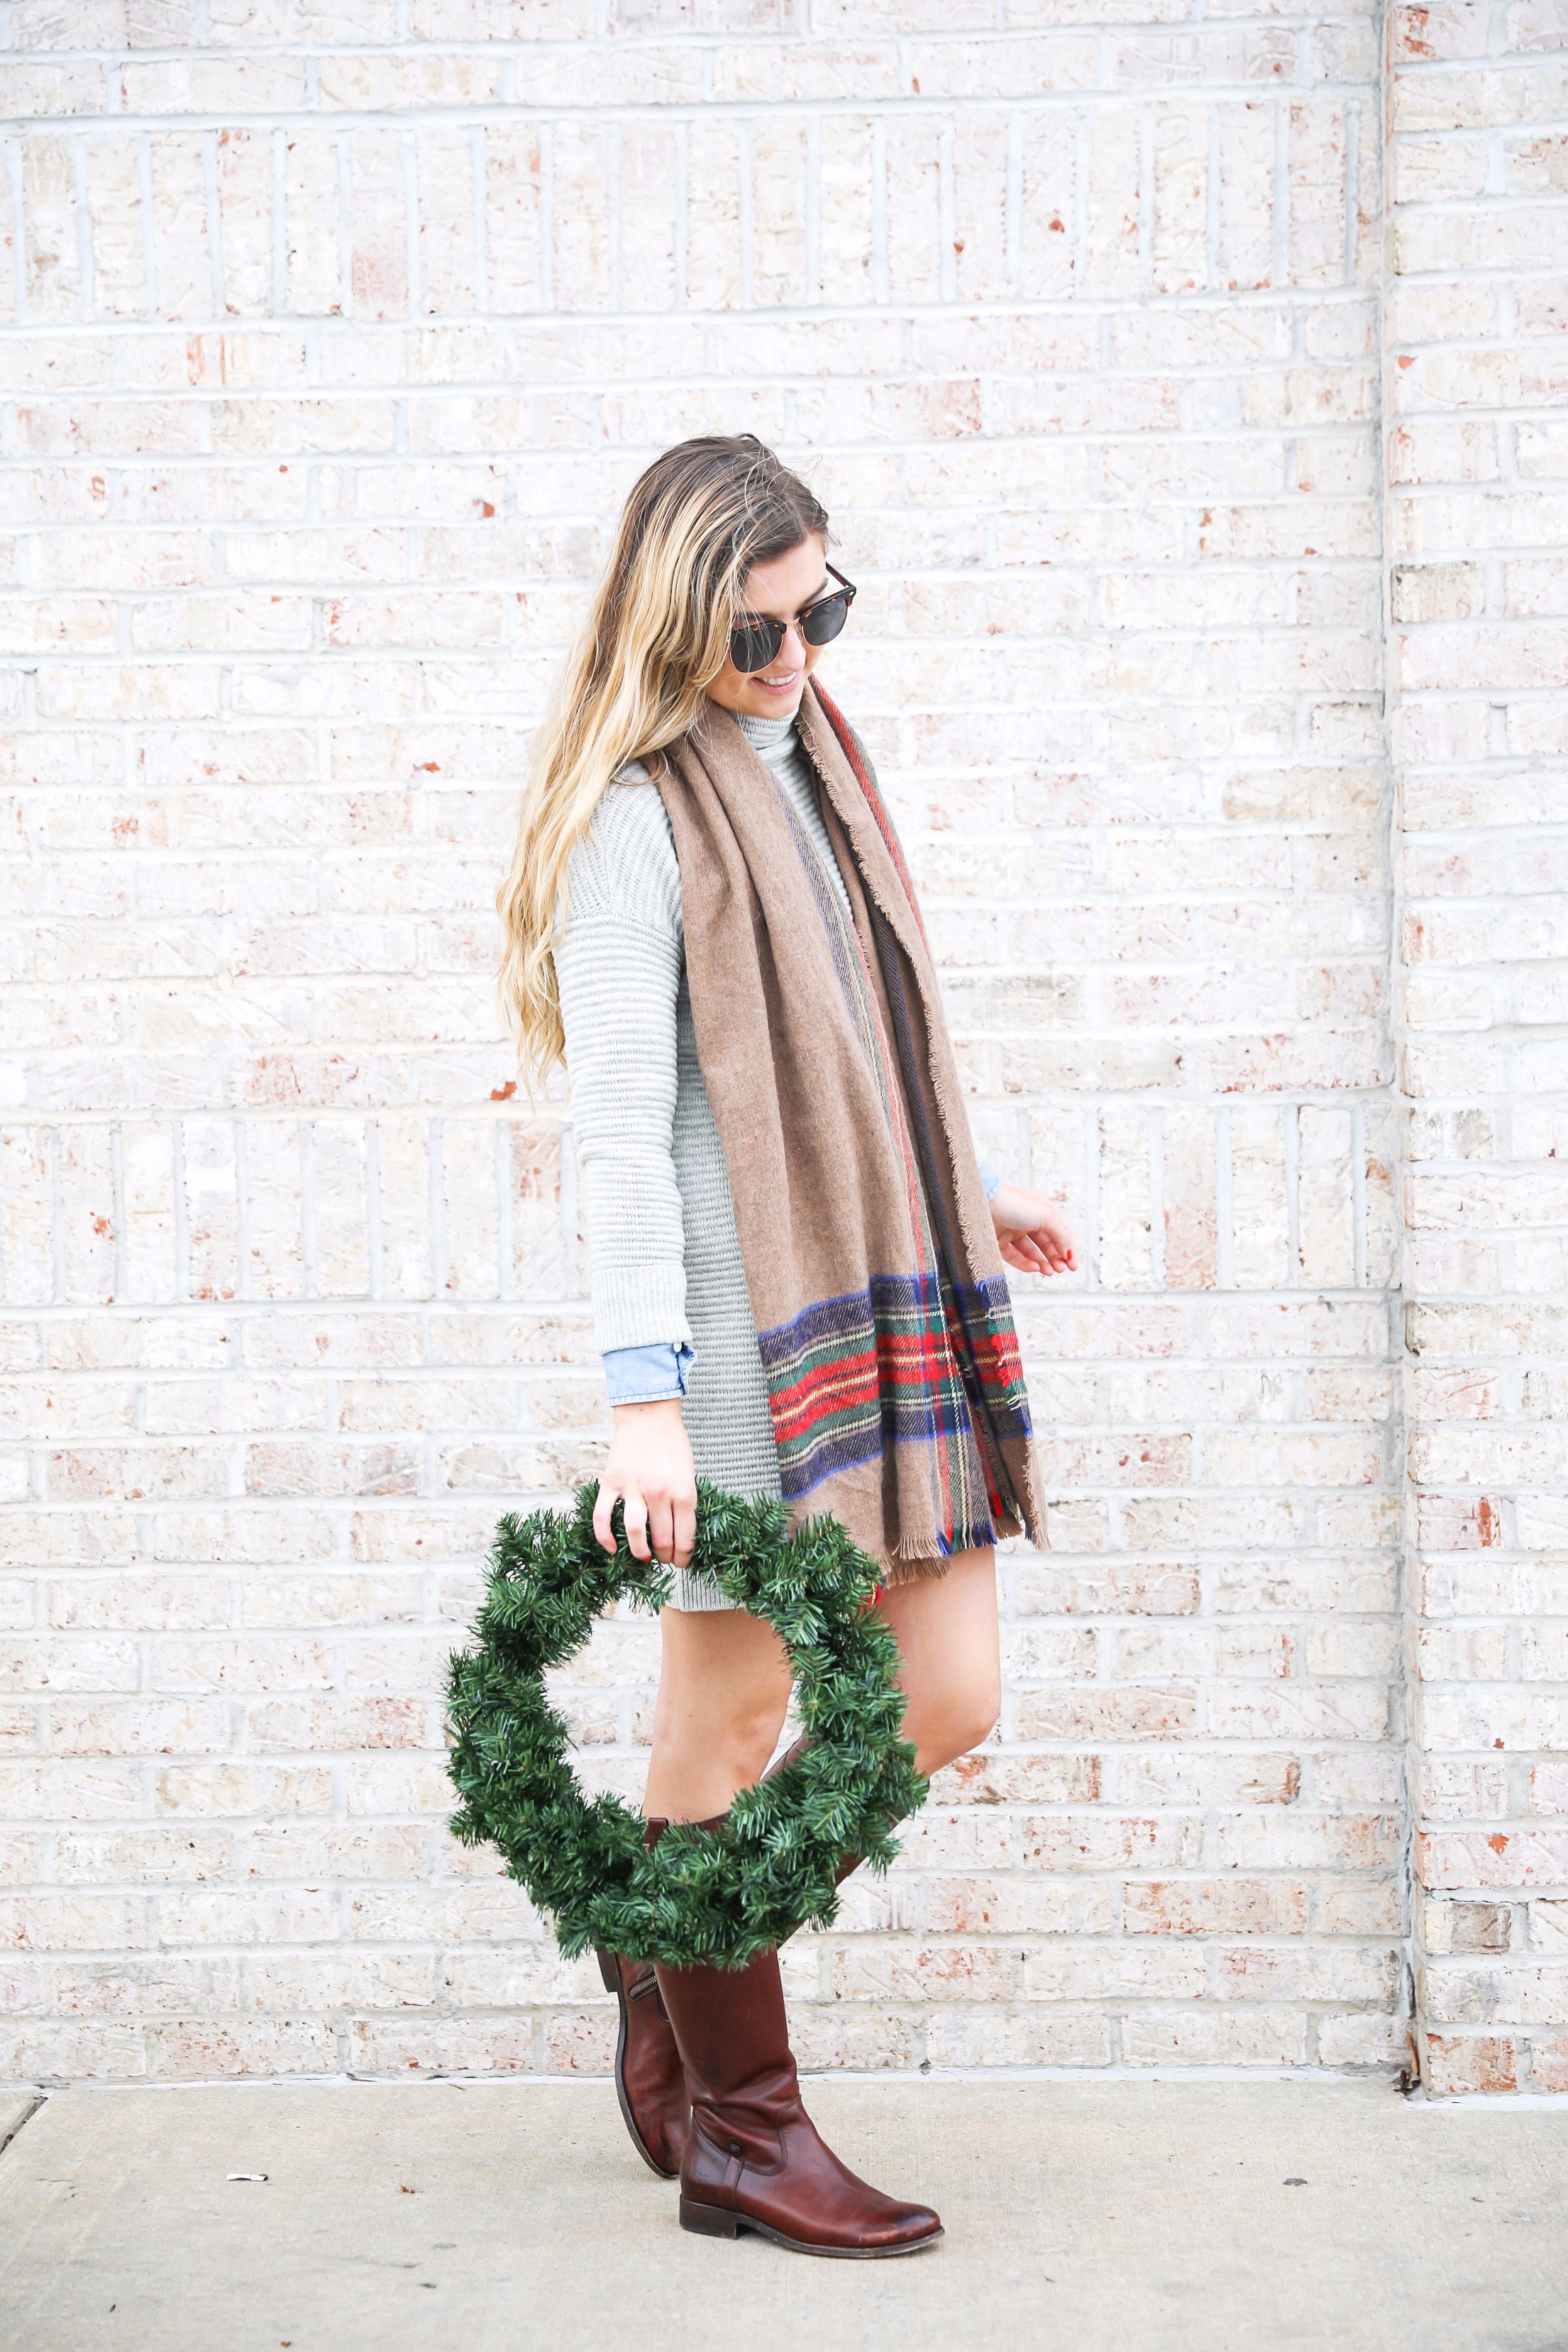 Grey sweater dress layered wtih a chambray top and plaid scarf! Paired with my favorite riding boots by frye boots! Photos taken with a christmas wreath. Christmas wreath photos by lauren lindmark on the blog daily dose of charm